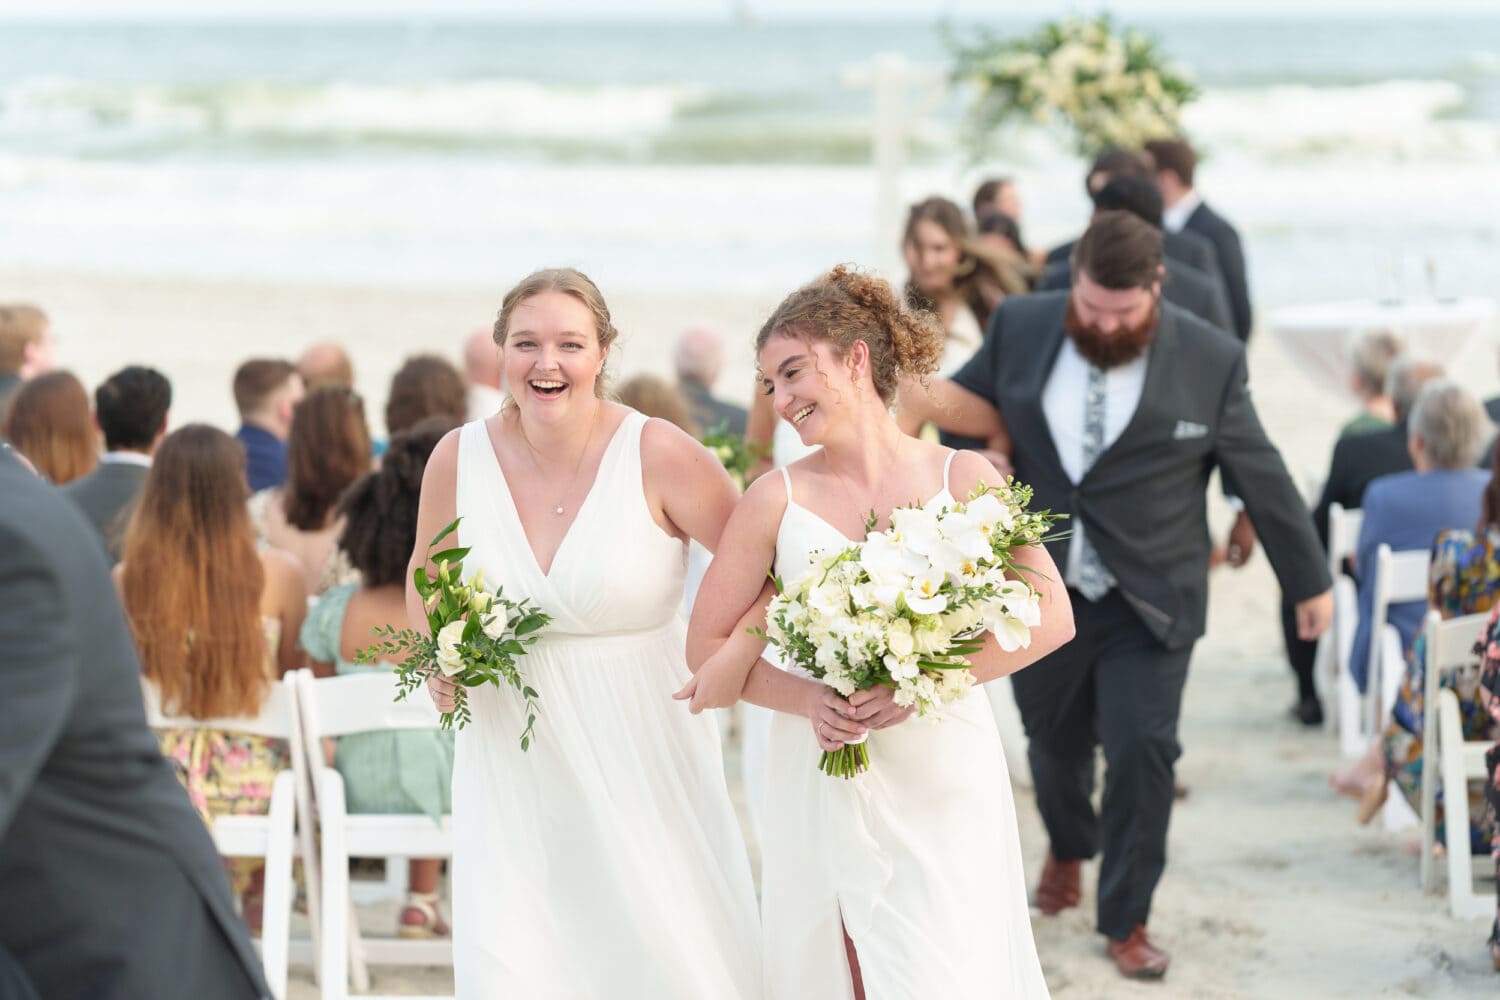 Happiness after the ceremony - Hilton Myrtle Beach Resort